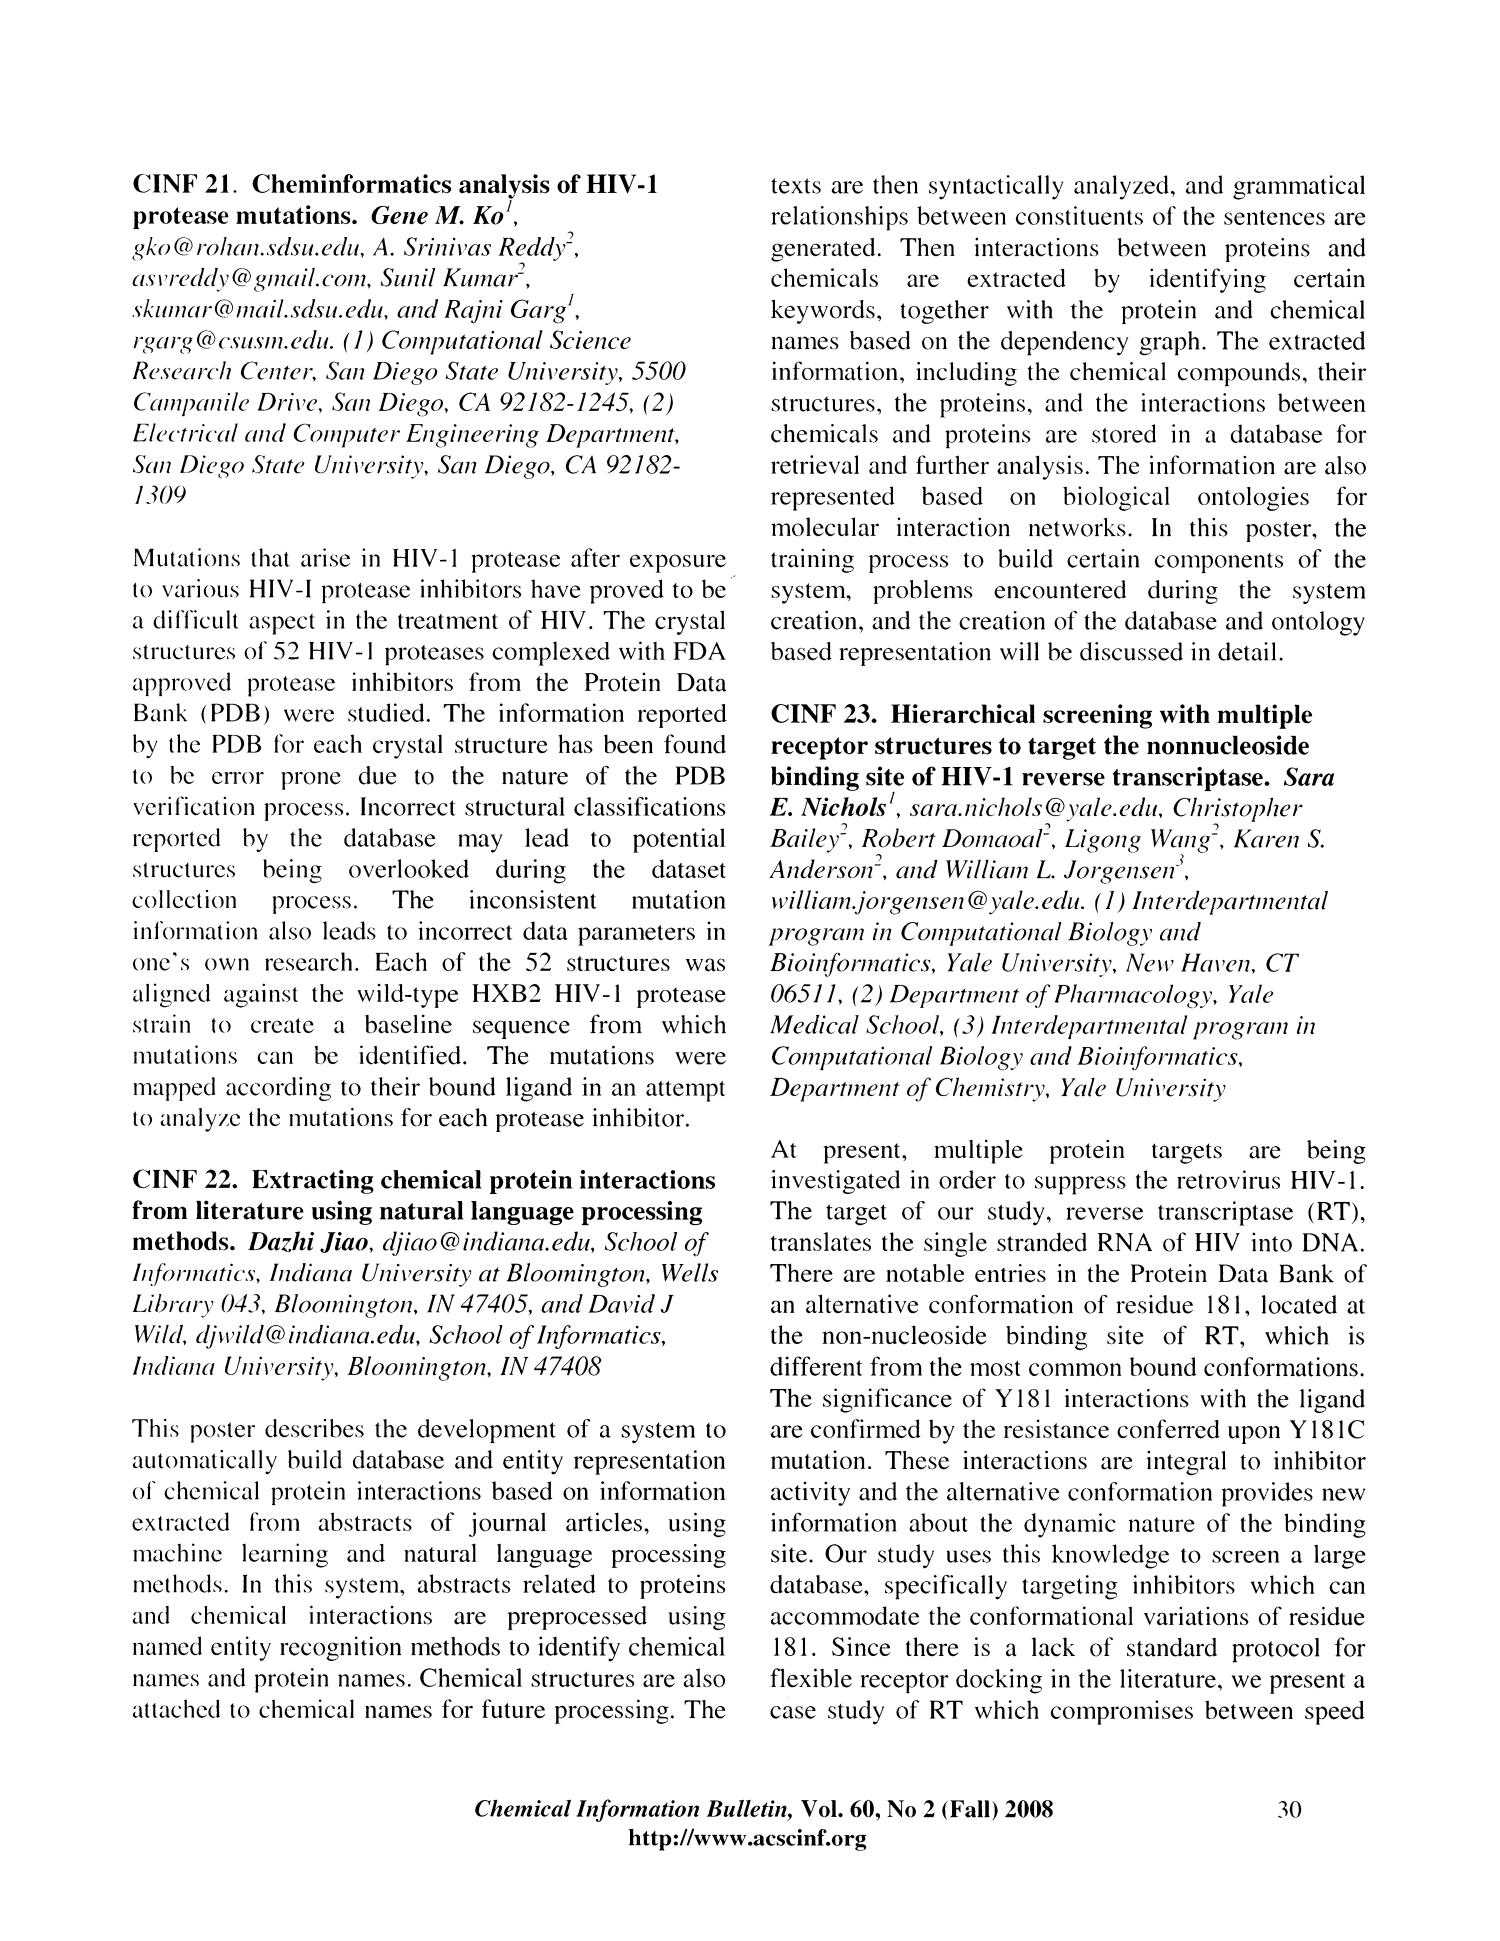 Chemical Information Bulletin, Volume 60, Number 2, Fall 2008
                                                
                                                    [Sequence #]: 32 of 56
                                                